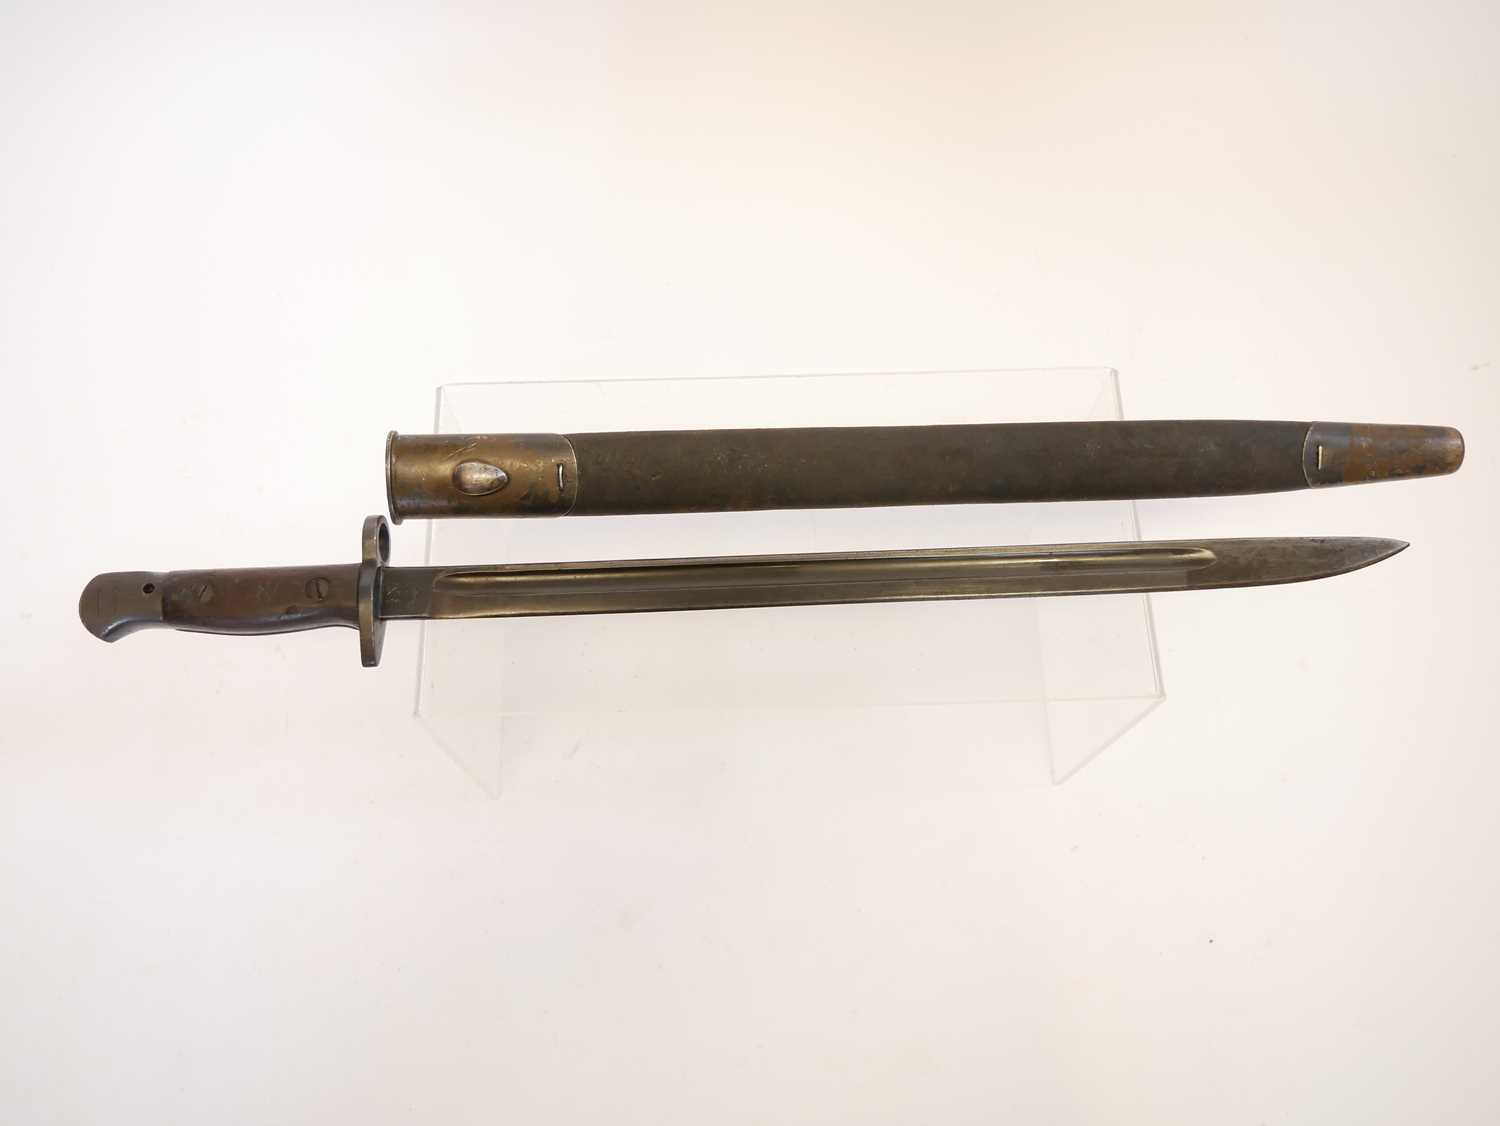 Lee Enfield SMLE 1907 pattern sword bayonet and scabbard, by Chapman, the ricasso stamped with 2' 17 - Image 2 of 9